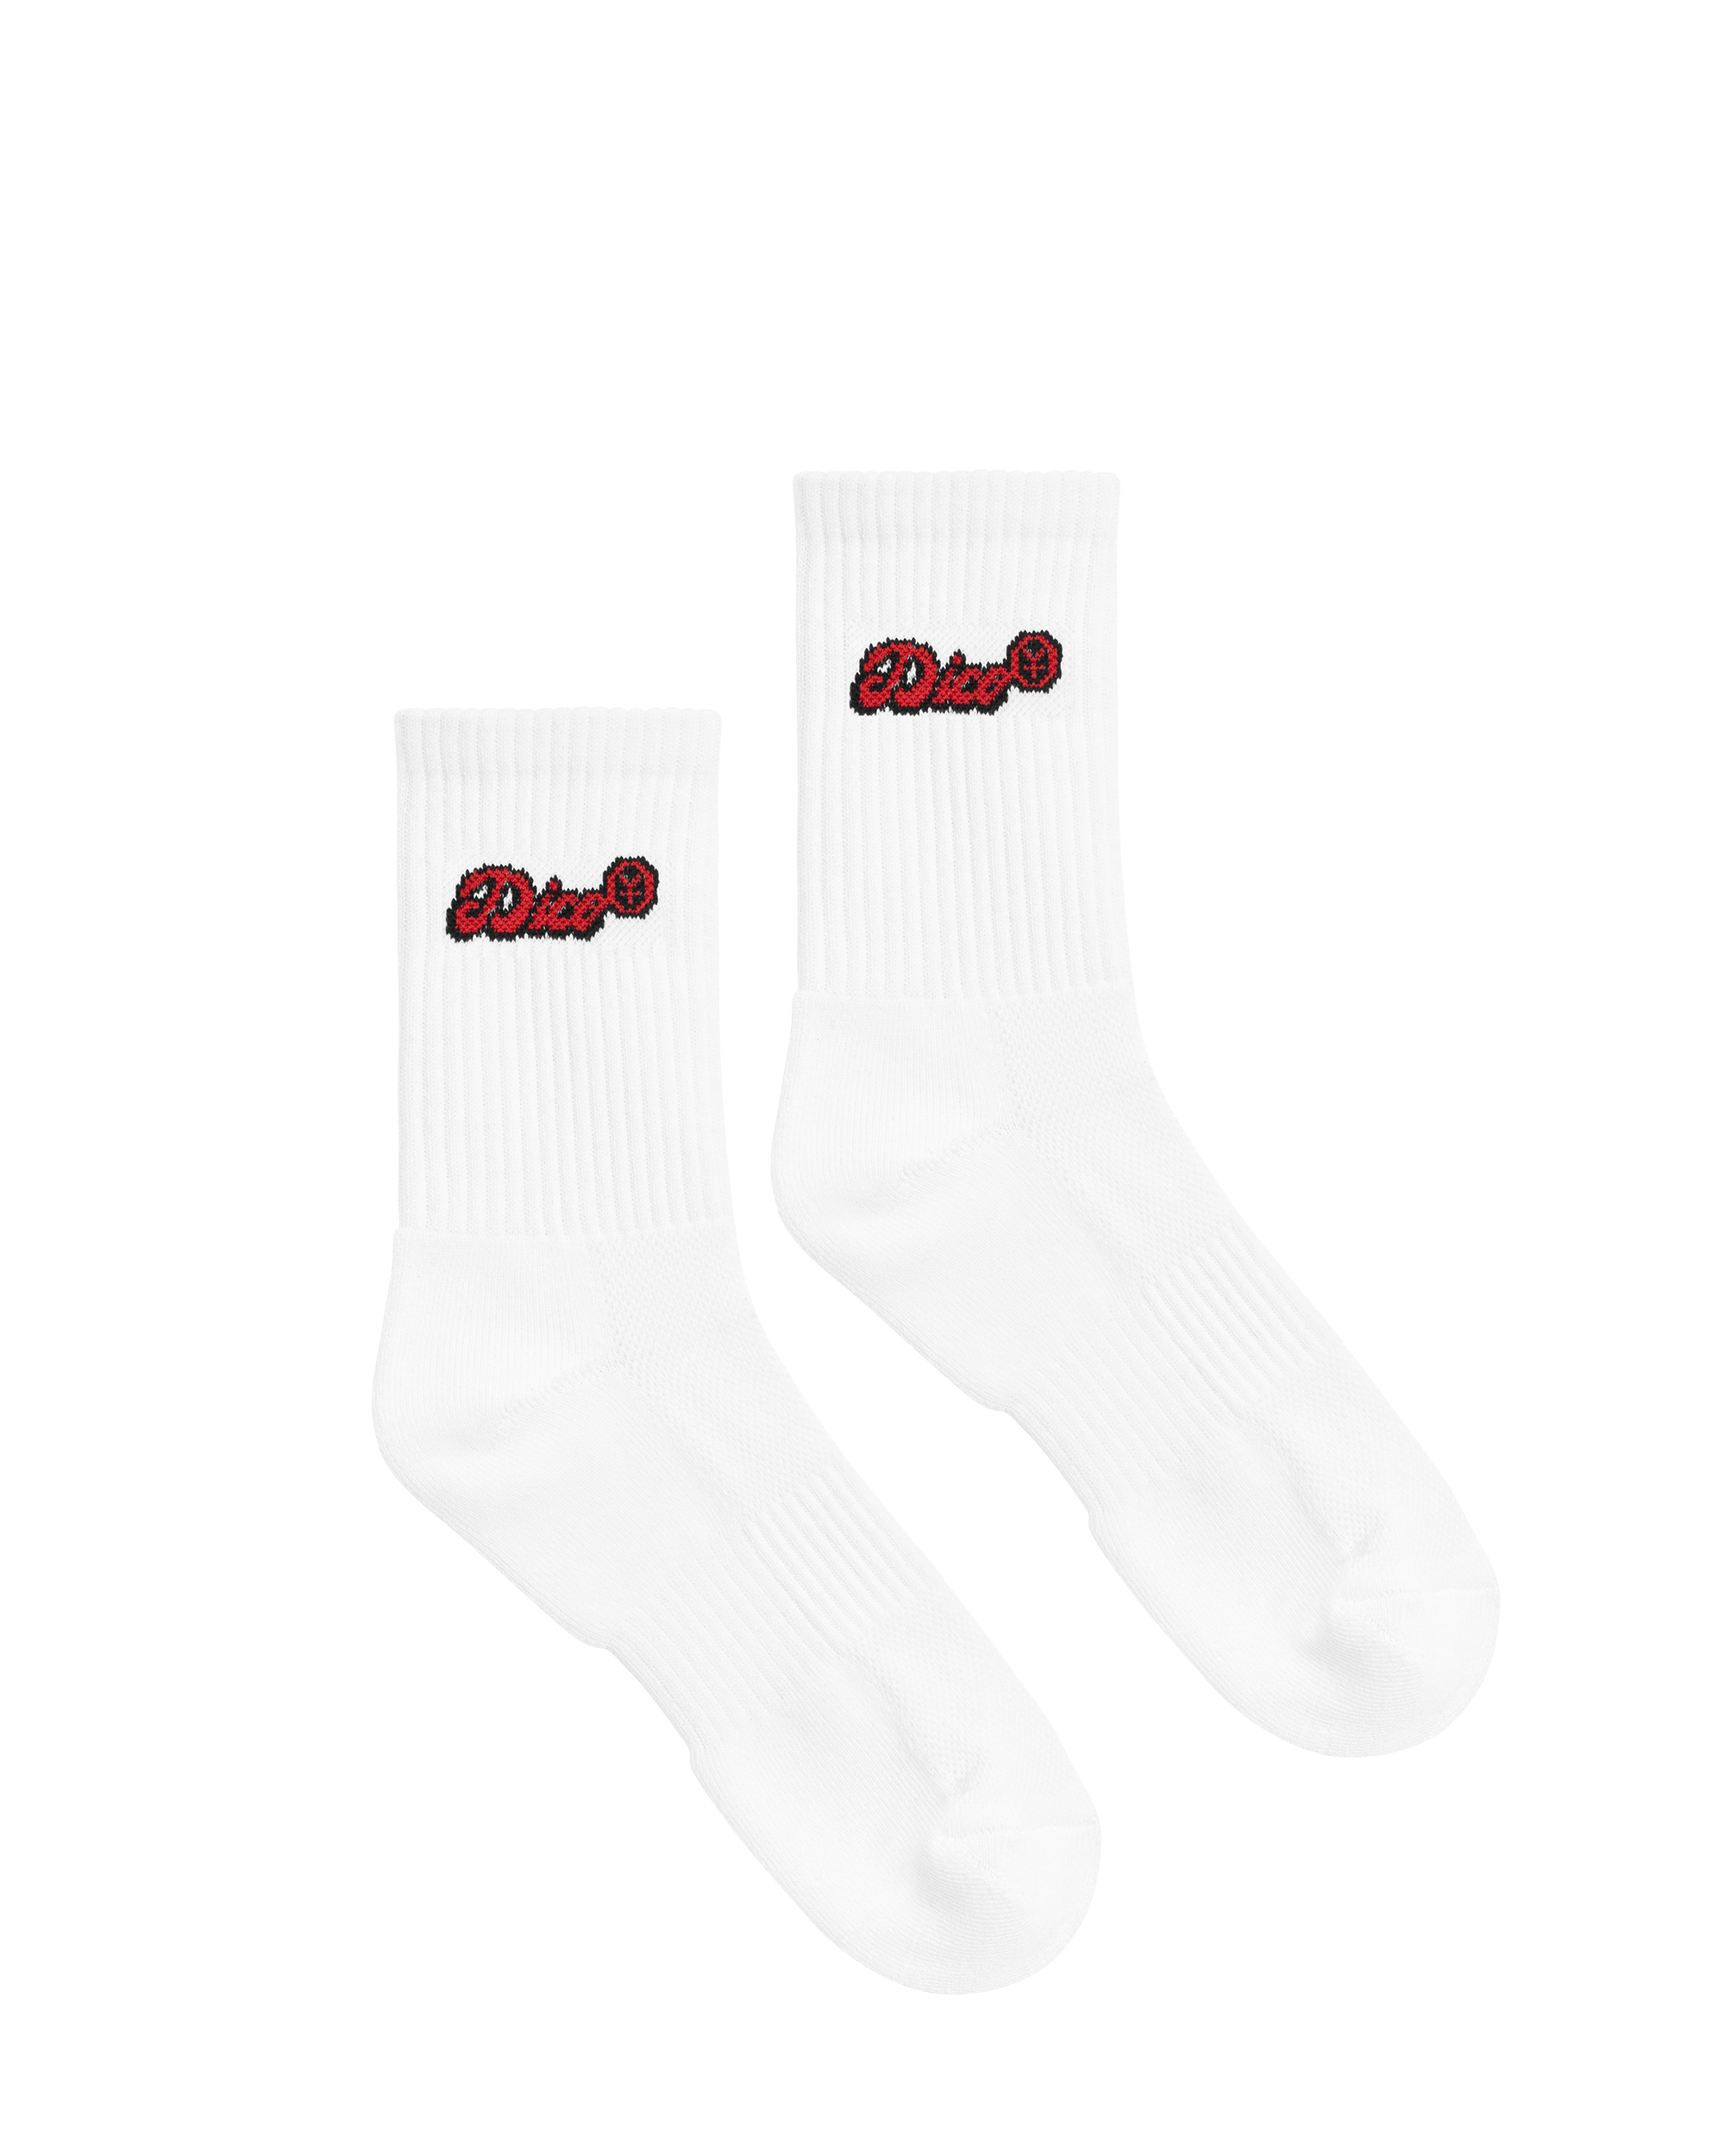 Dico Comfy Socks - Red/White - Pack of 3